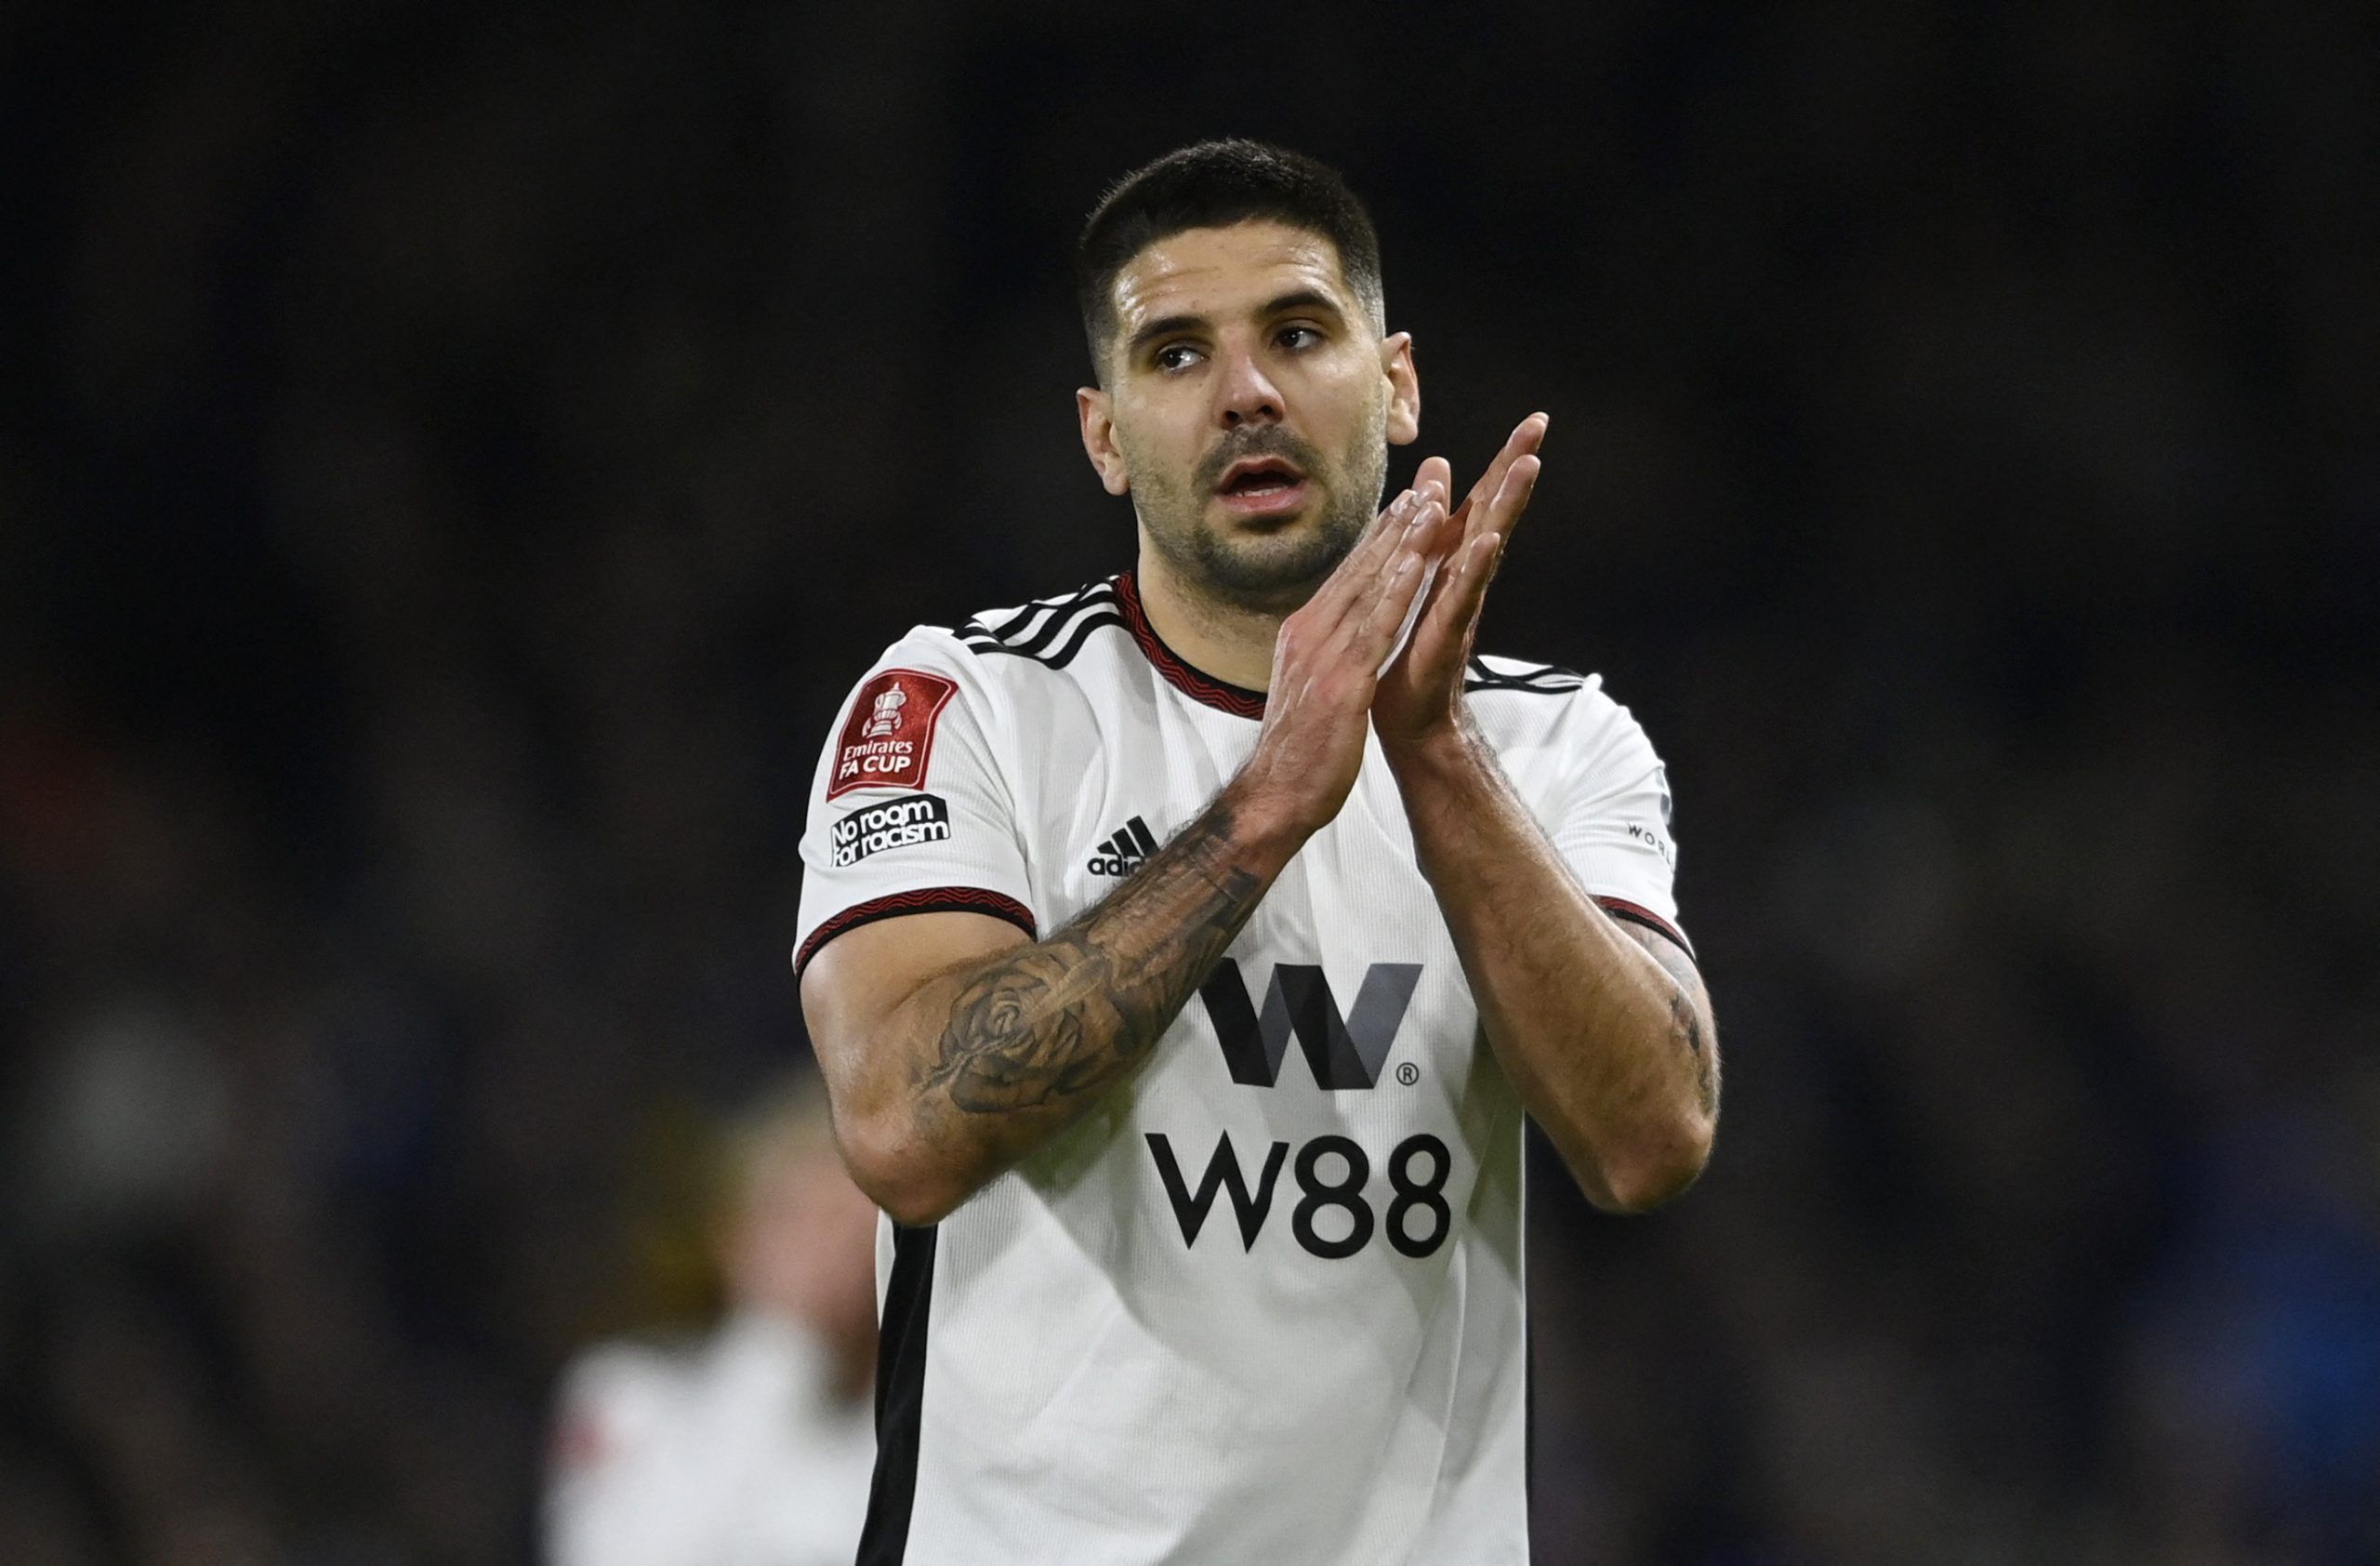 Soccer Football - FA Cup - Fifth Round - Fulham v Leeds United - Craven Cottage, London, Britain - February 28, 2023 Fulham's Aleksandar Mitrovic applauds fans as he is being substituted REUTERS/Tony Obrien